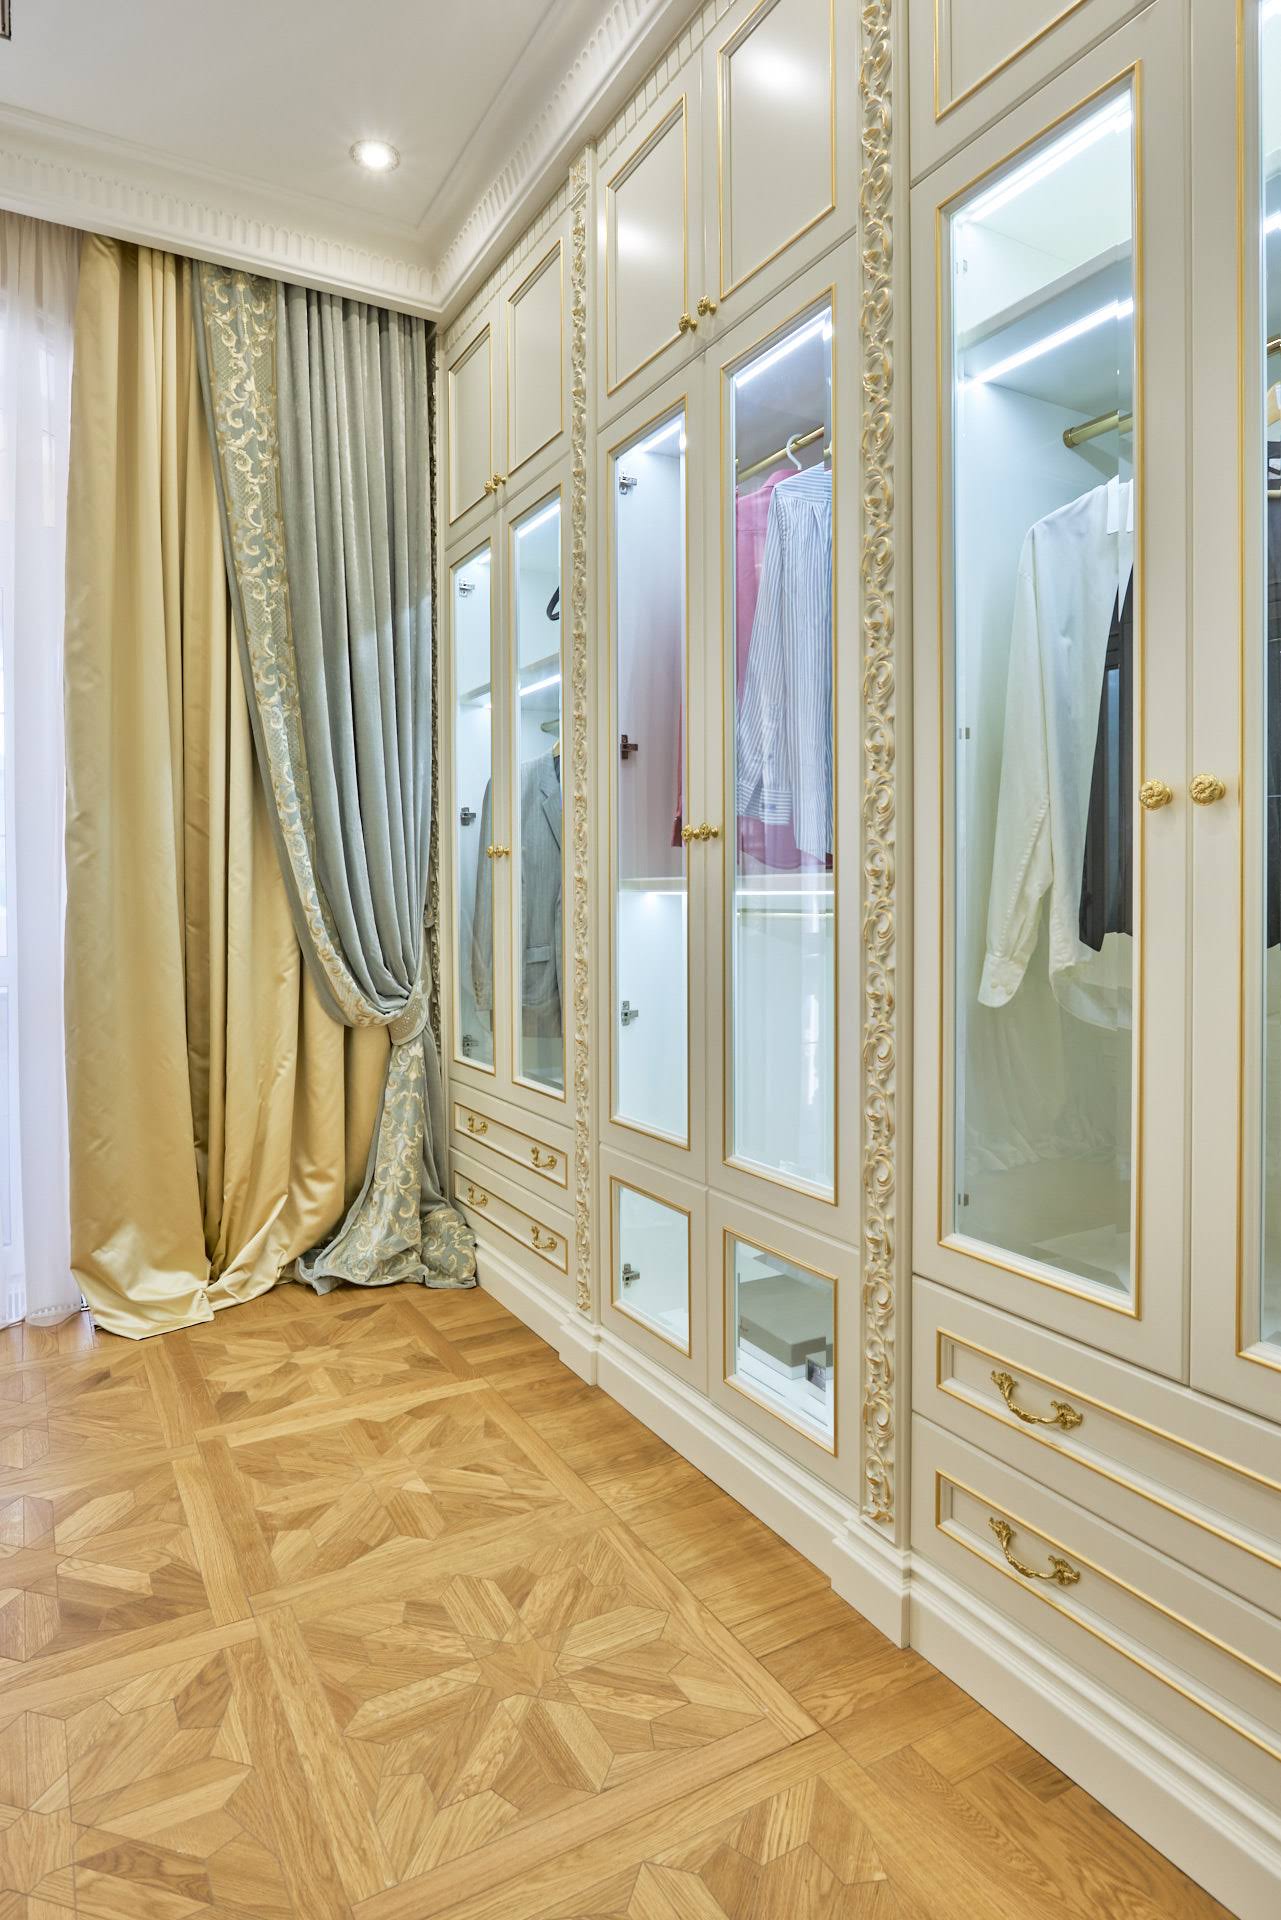 Dressing room in a classic interior